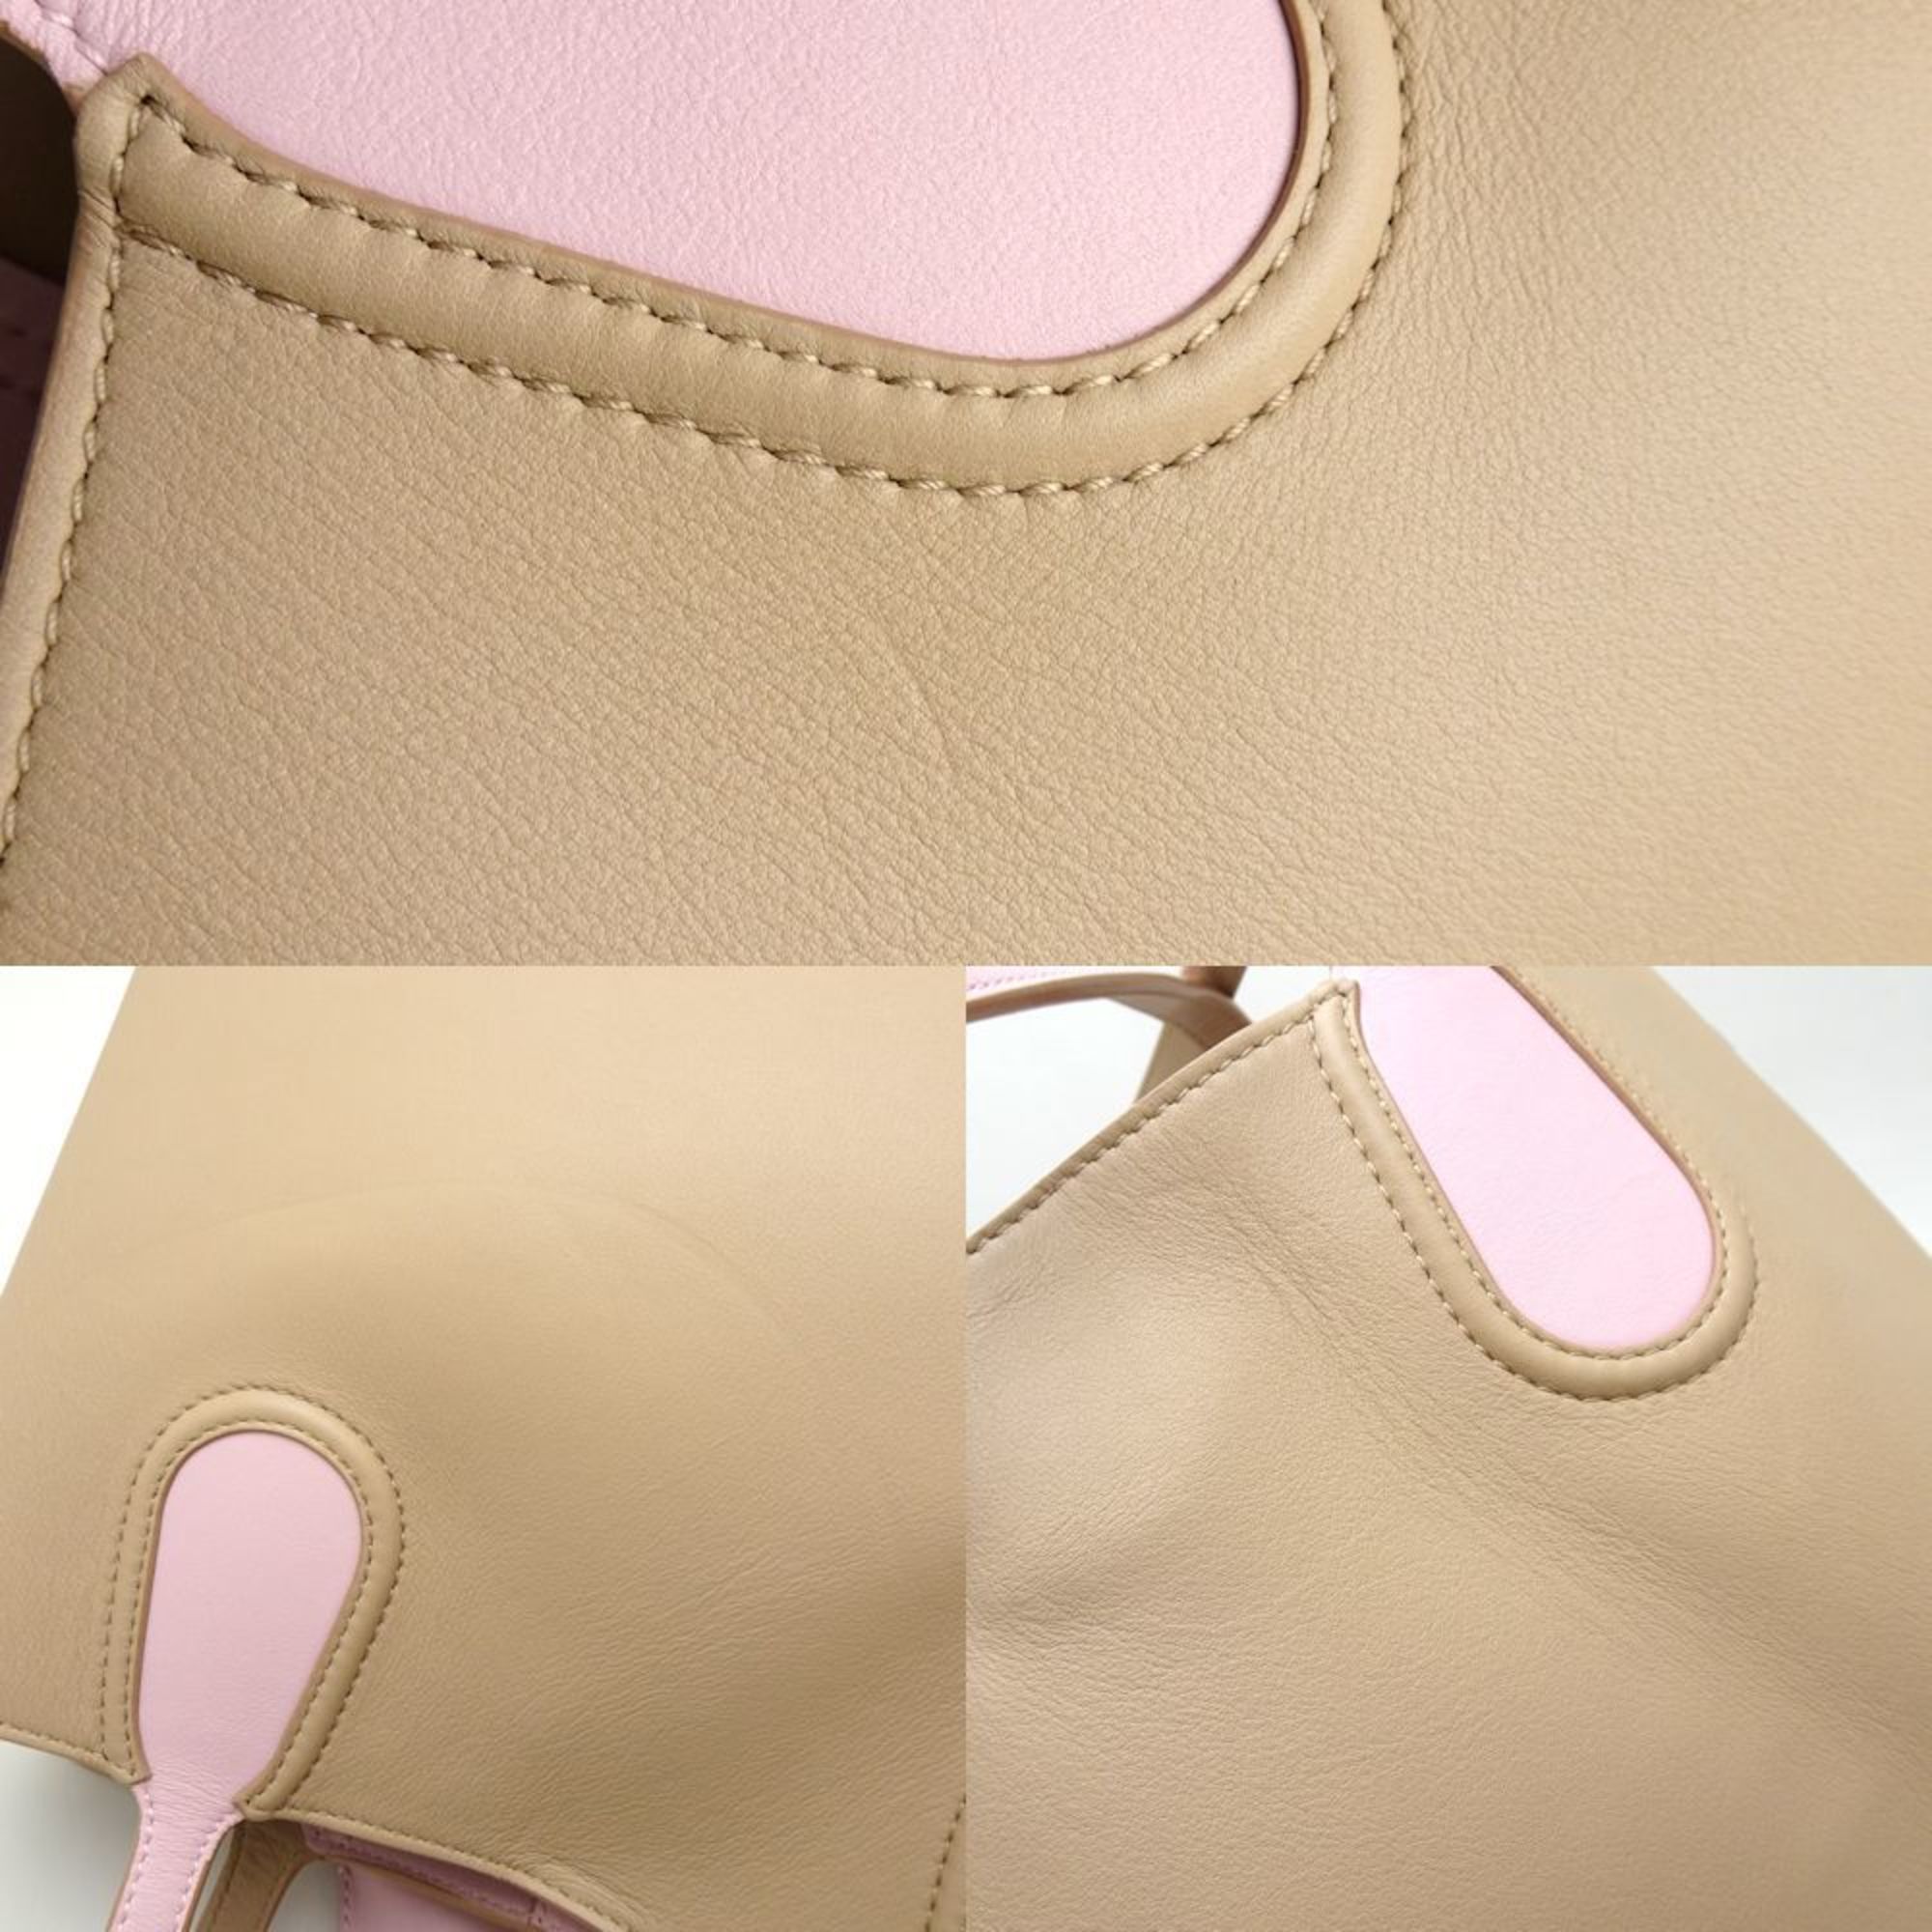 Christian Dior Addict M0832 Tote Bag Leather Beige Pink 350540